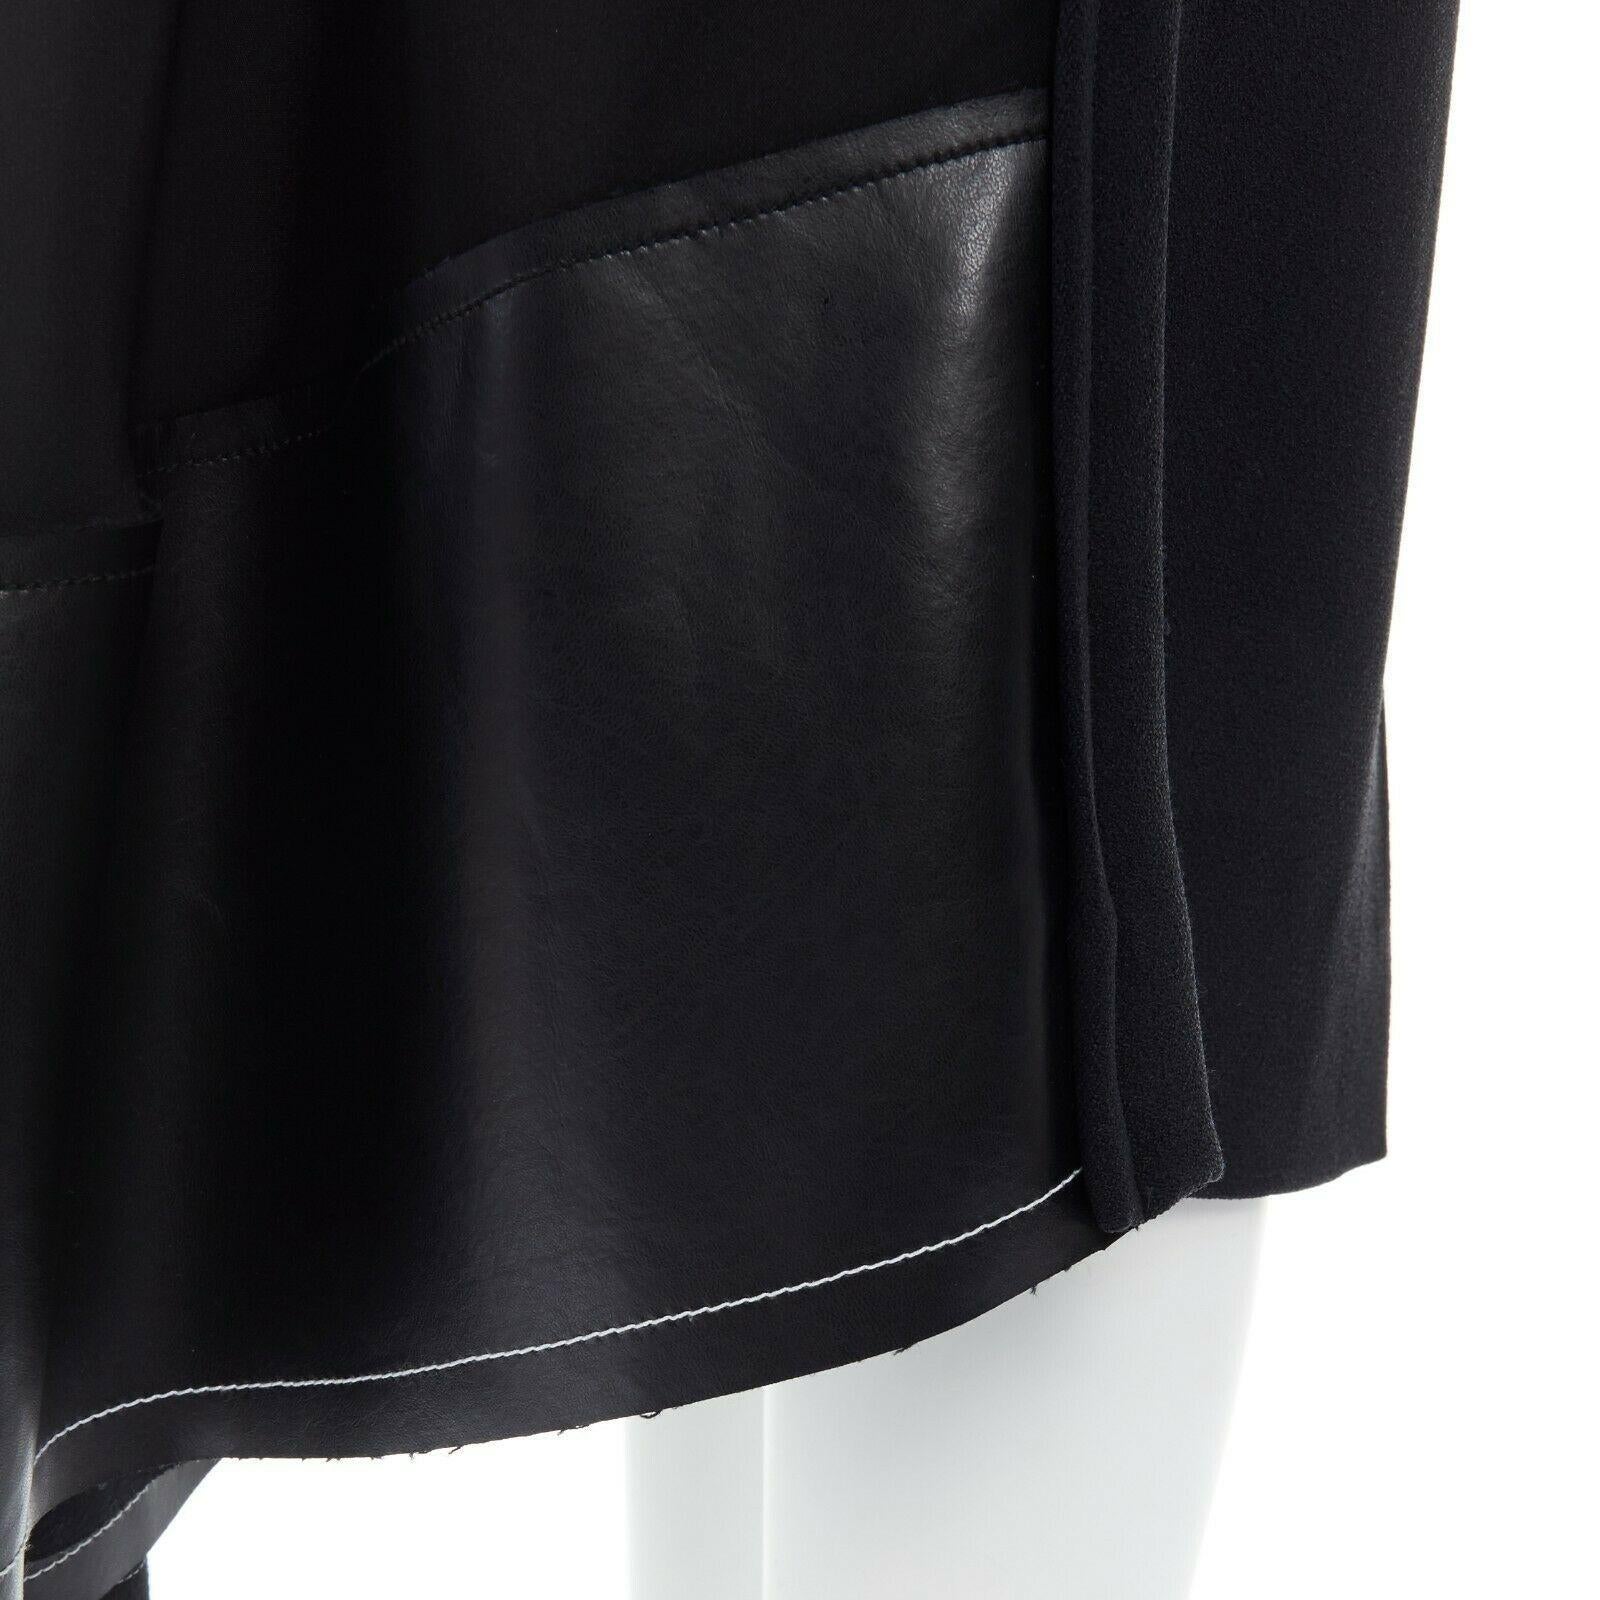 runway BALENCIAGA GHESQUIERE AW11 black faux leather panel skirt FR36 US4 UK8 S 4